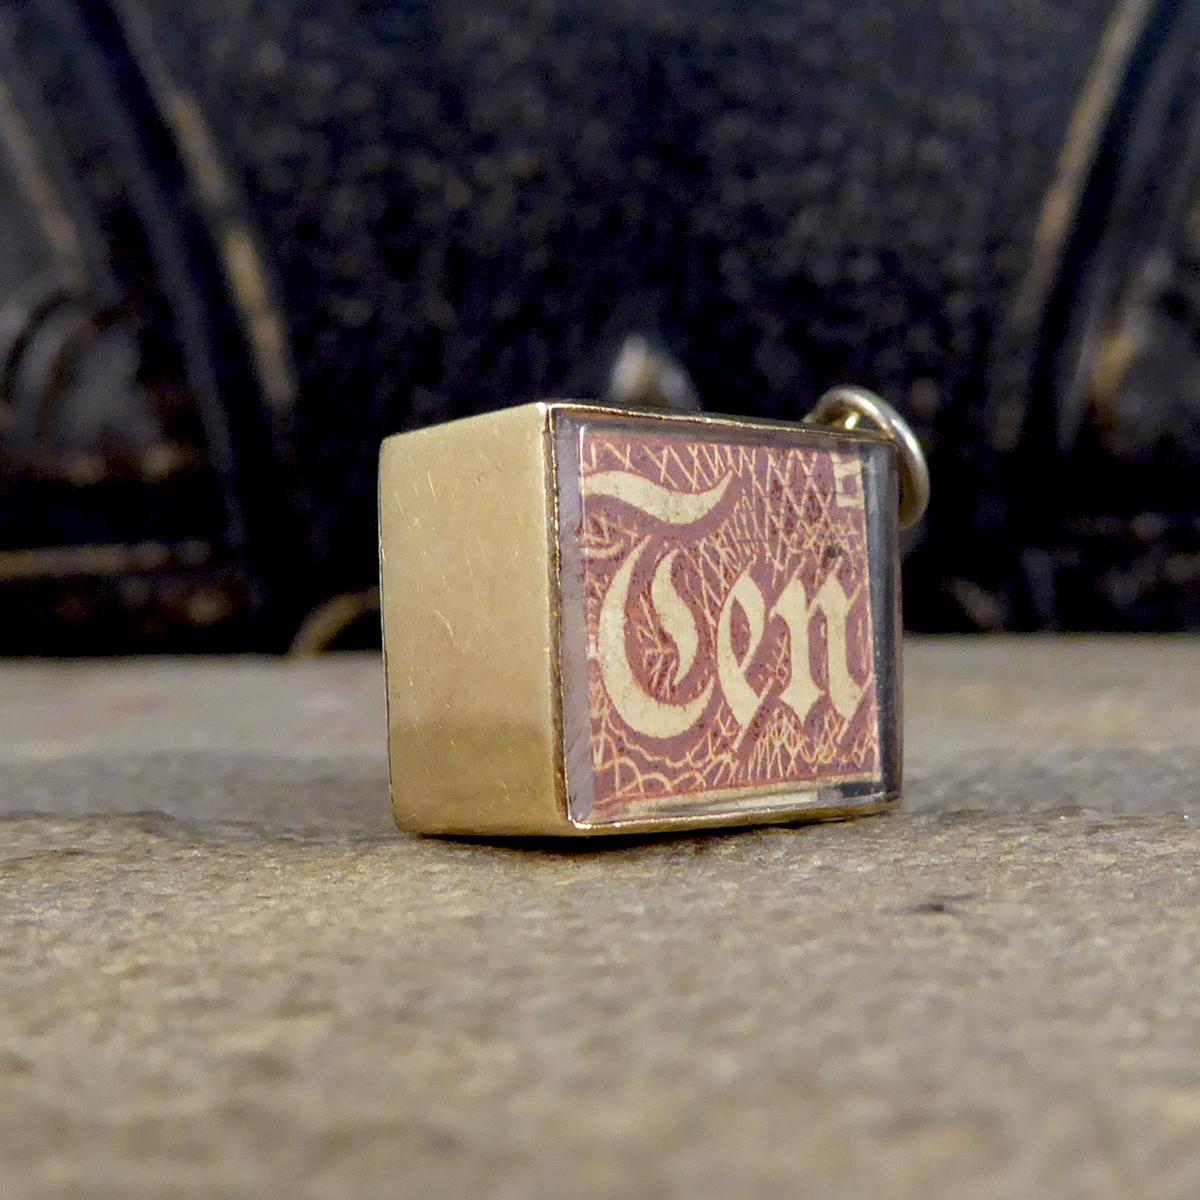 Such a lovely little 9ct Yellow Gold Art Deco Charm that holds a ten shilling note, and is engraved 